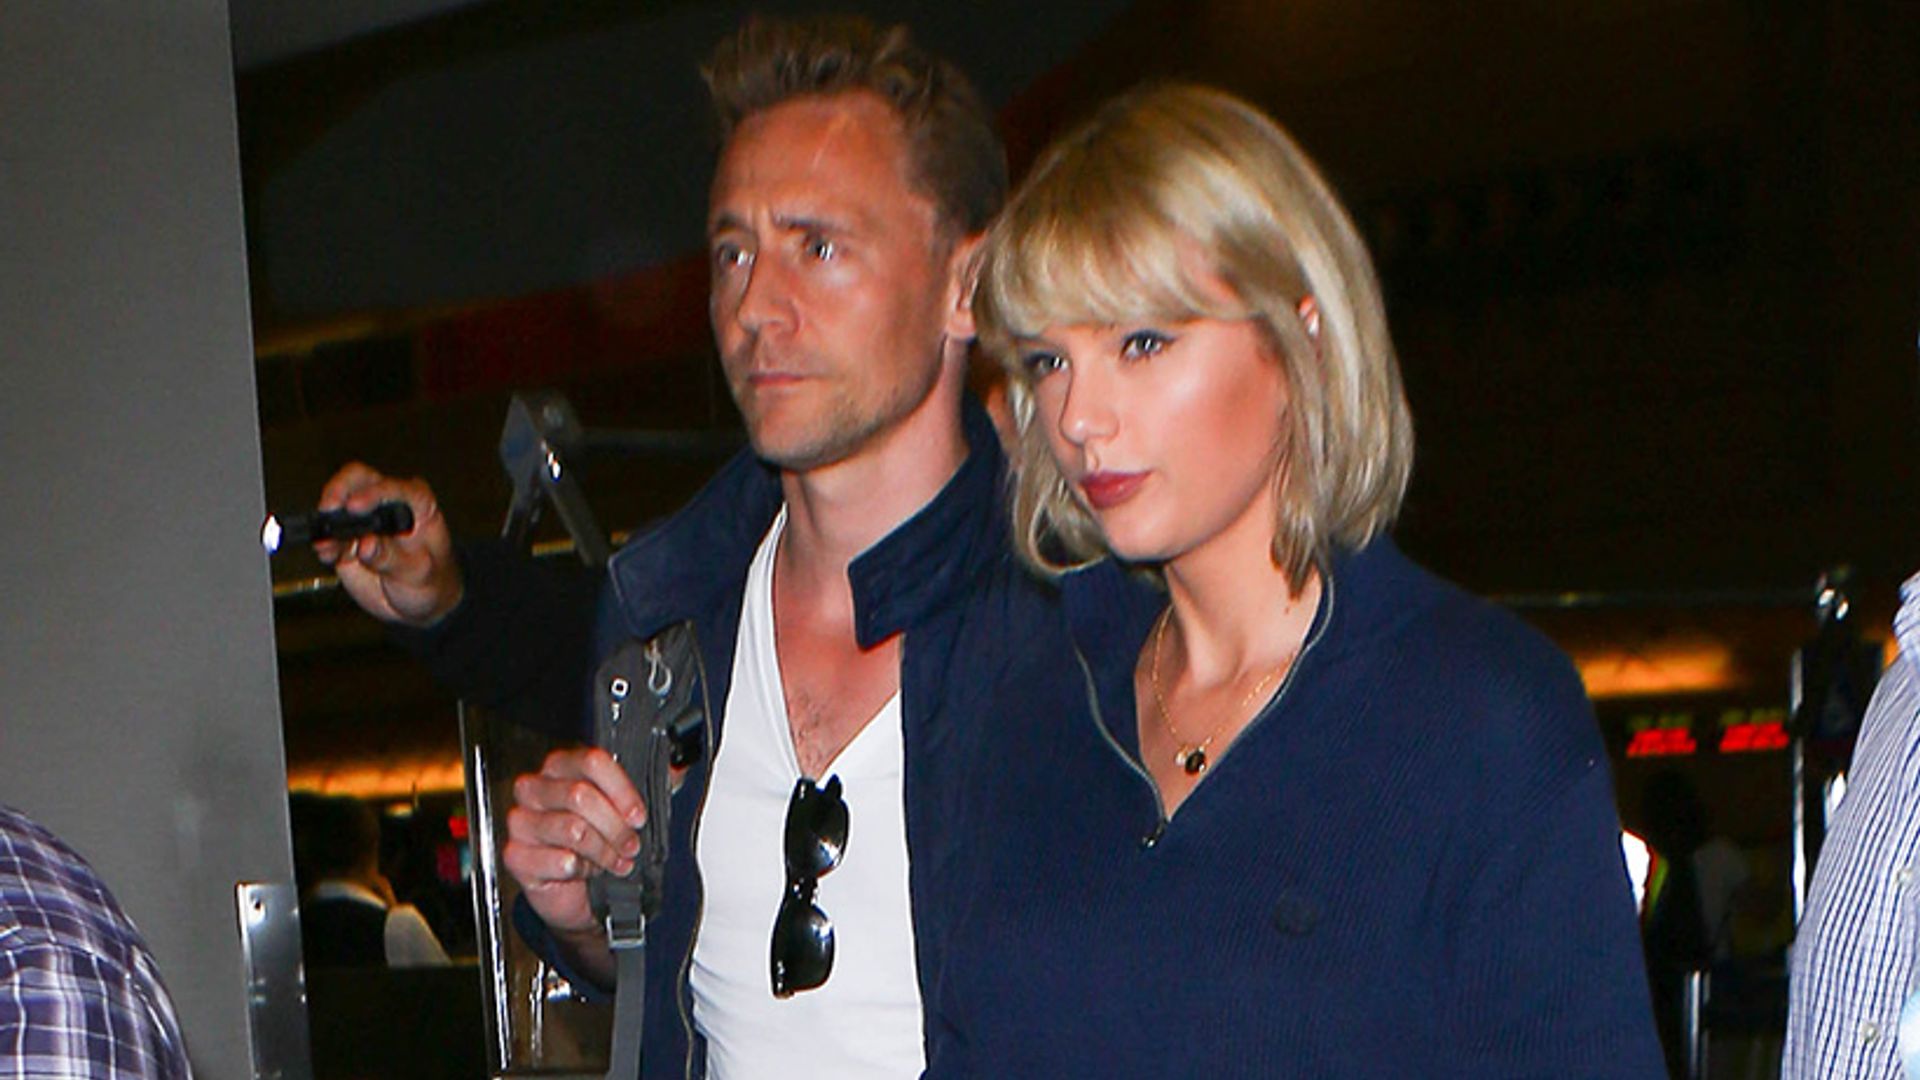 Tom Hiddleston on his romance with Taylor Swift: 'It comes down to being authentic'